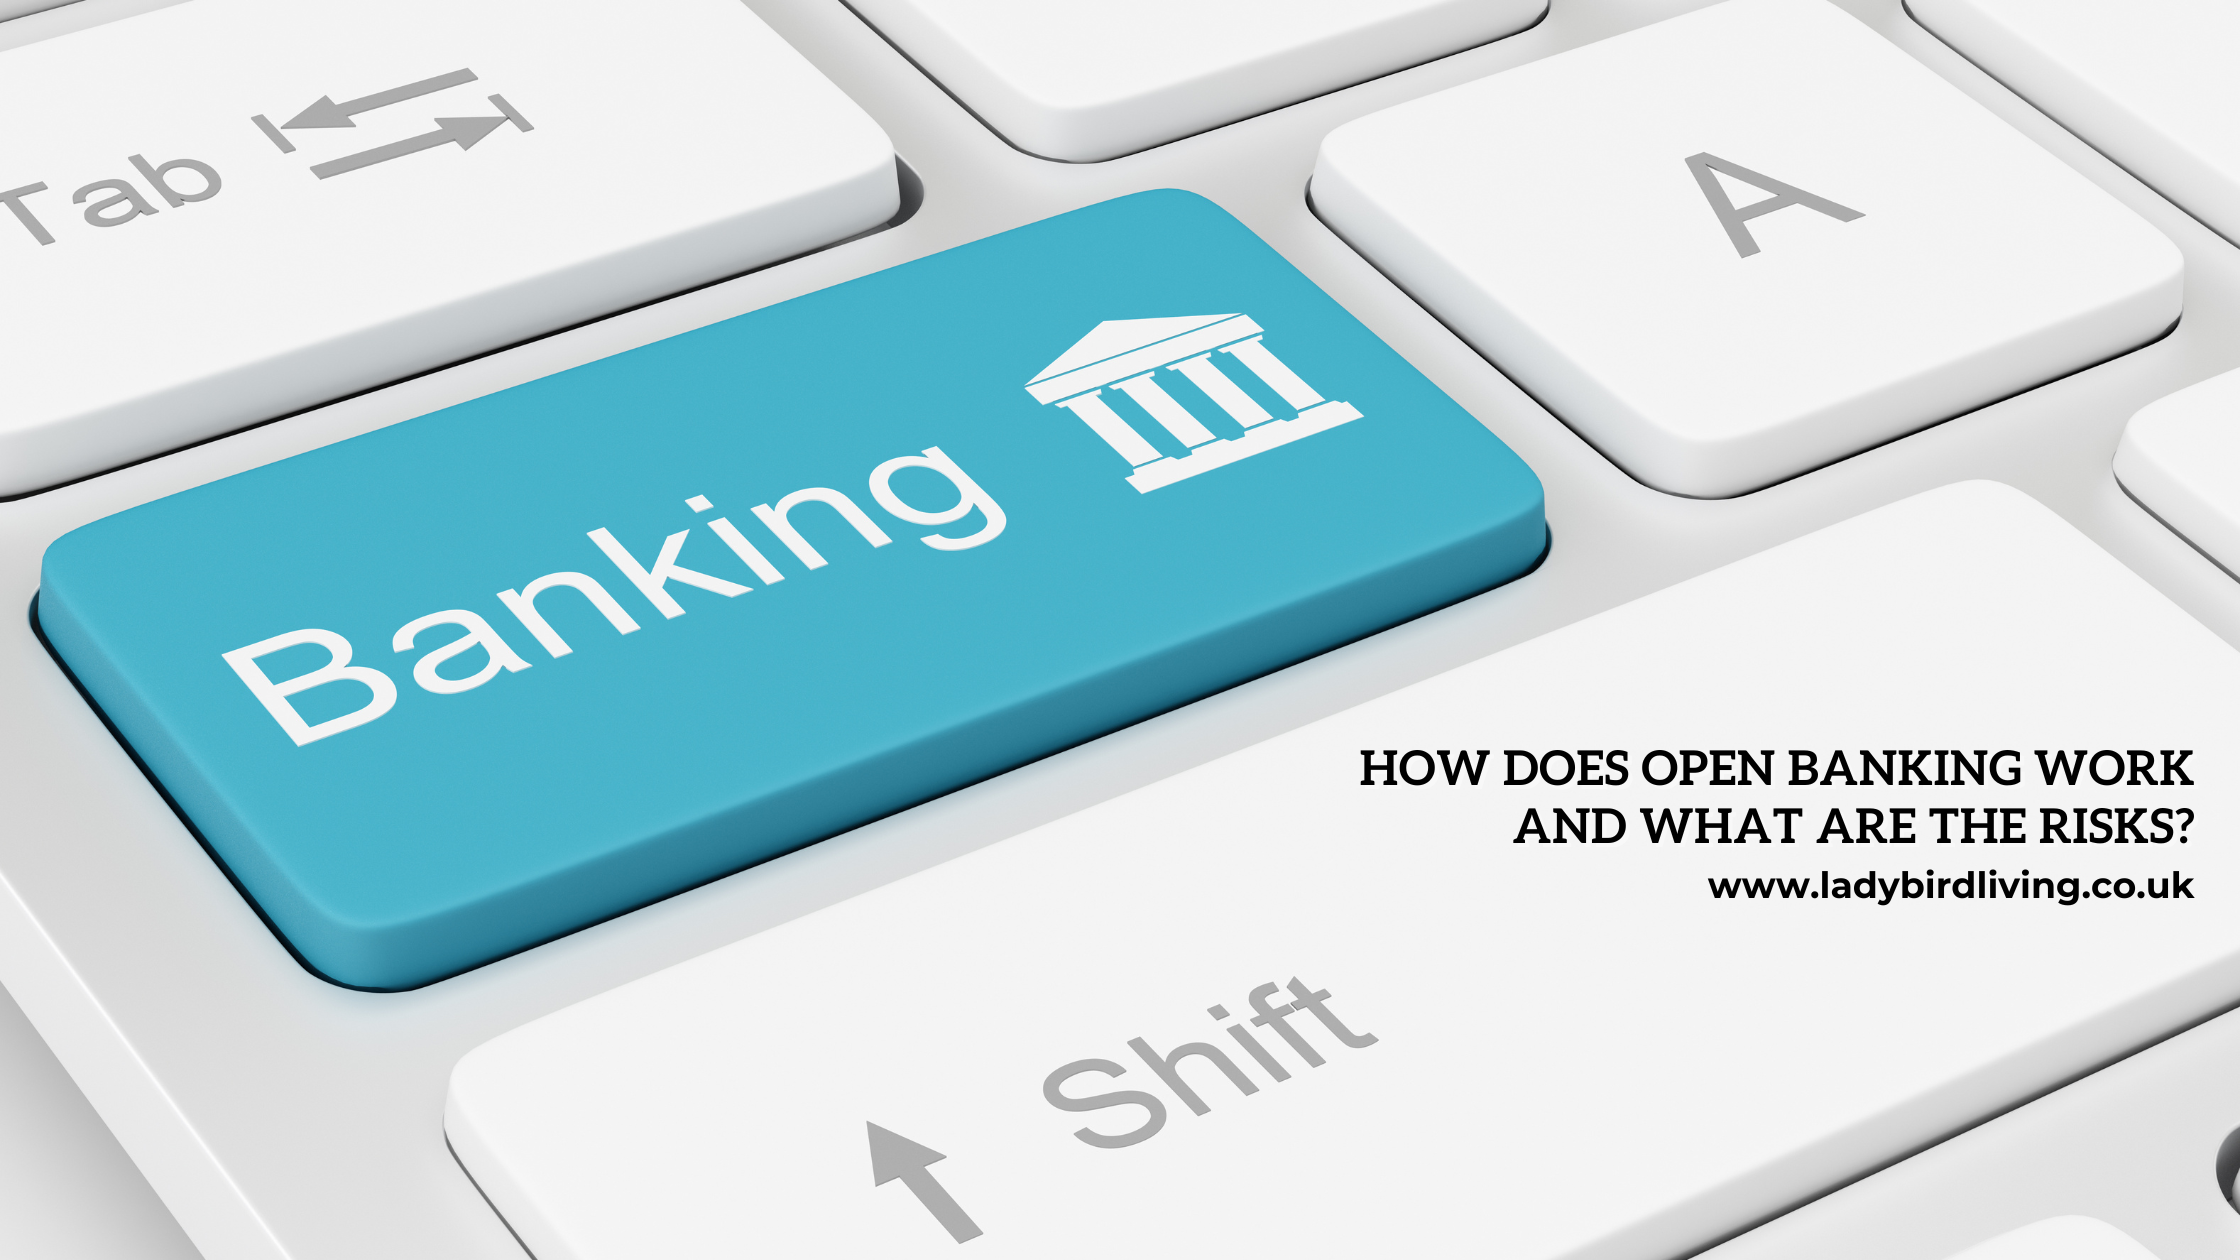 How does open banking work and what are the risks?